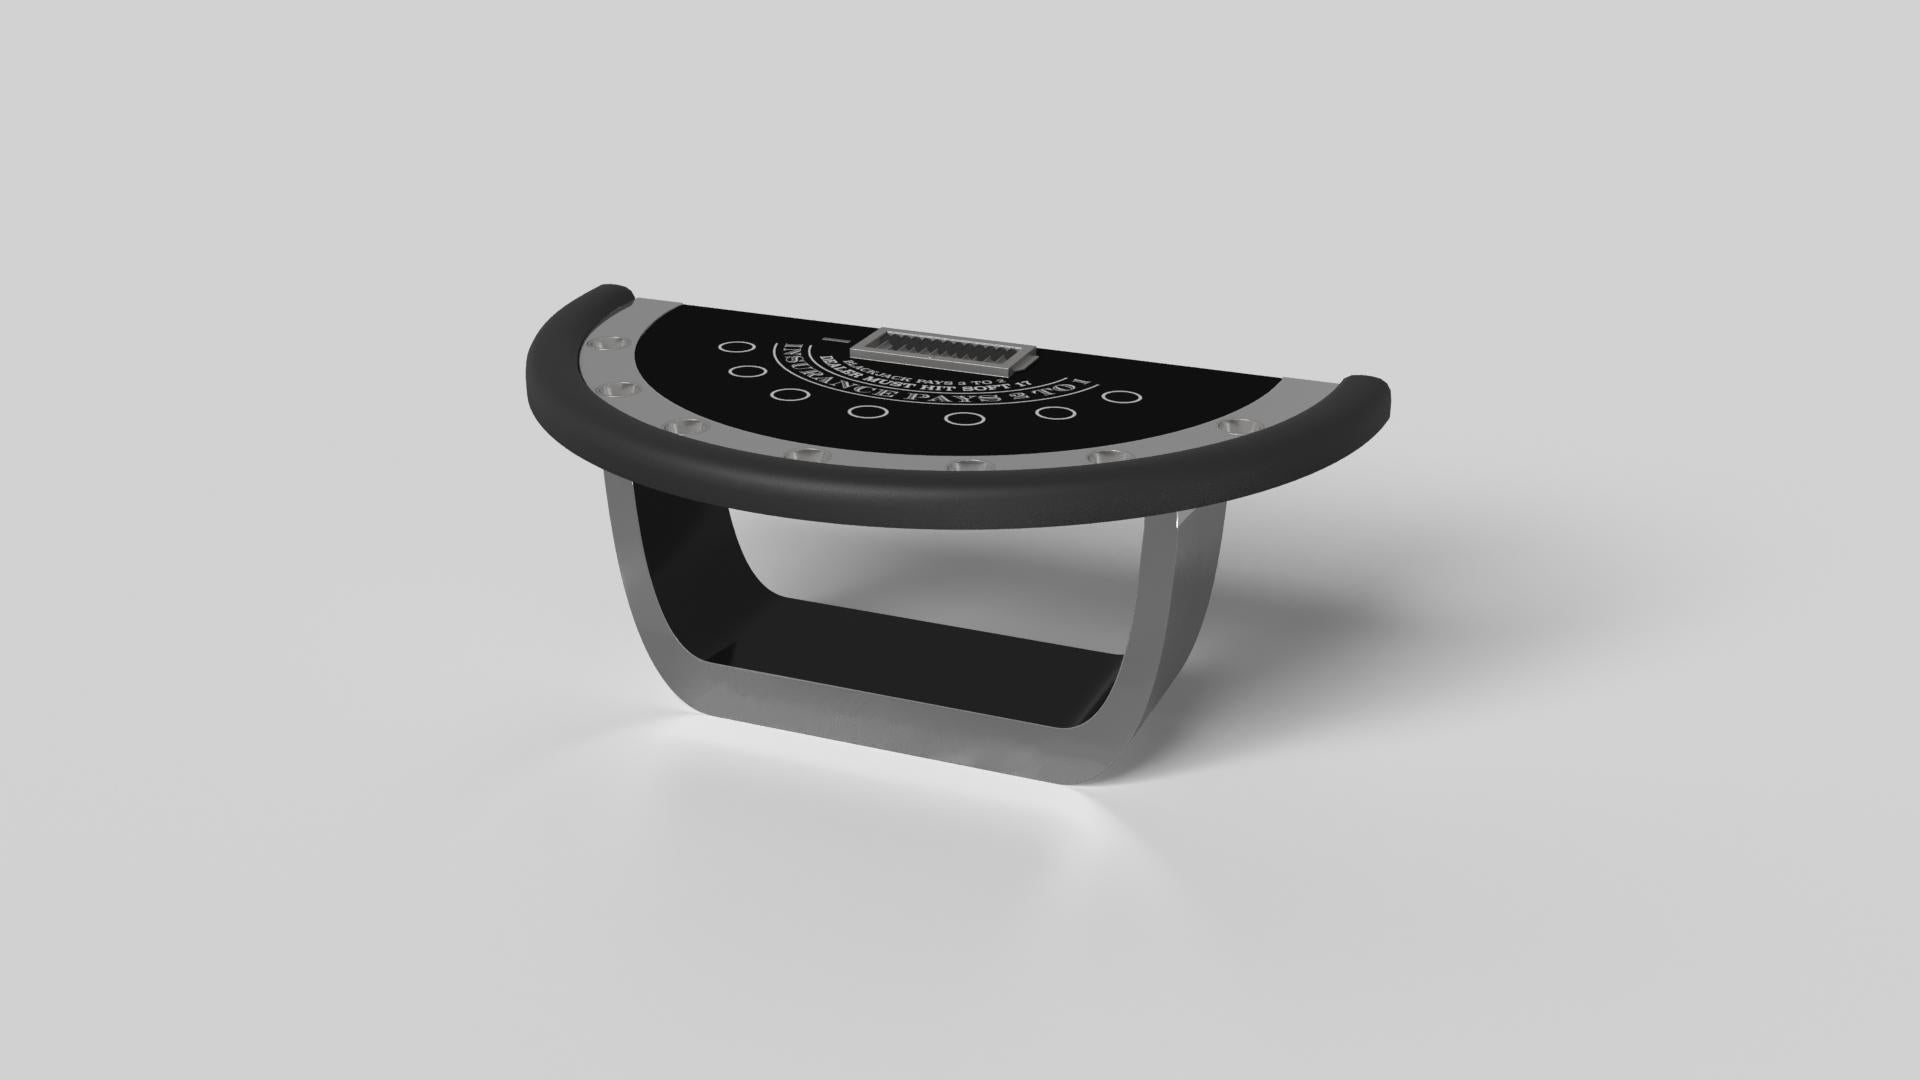 Handcrafted with intricate accents and a precision-carved curved base, the Sid blackjack table in black encompasses a series of smooth edges, distinctive details, and unconventional elements in one unique expression of luxury design. Built by hand